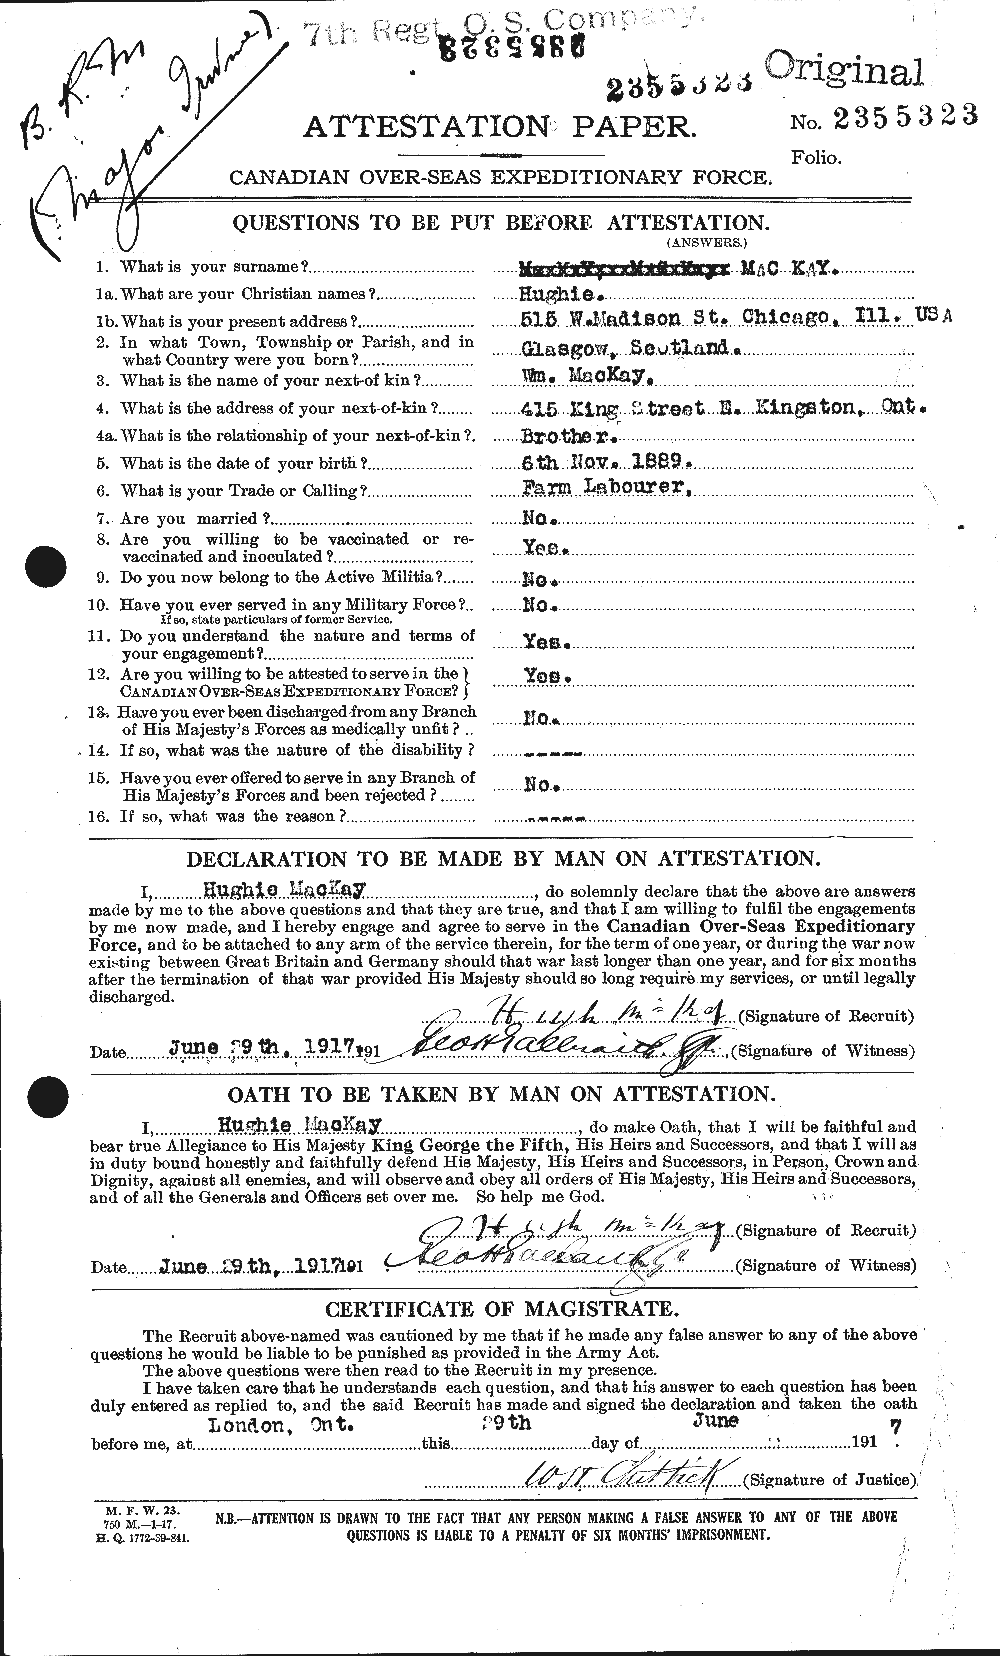 Personnel Records of the First World War - CEF 534784a